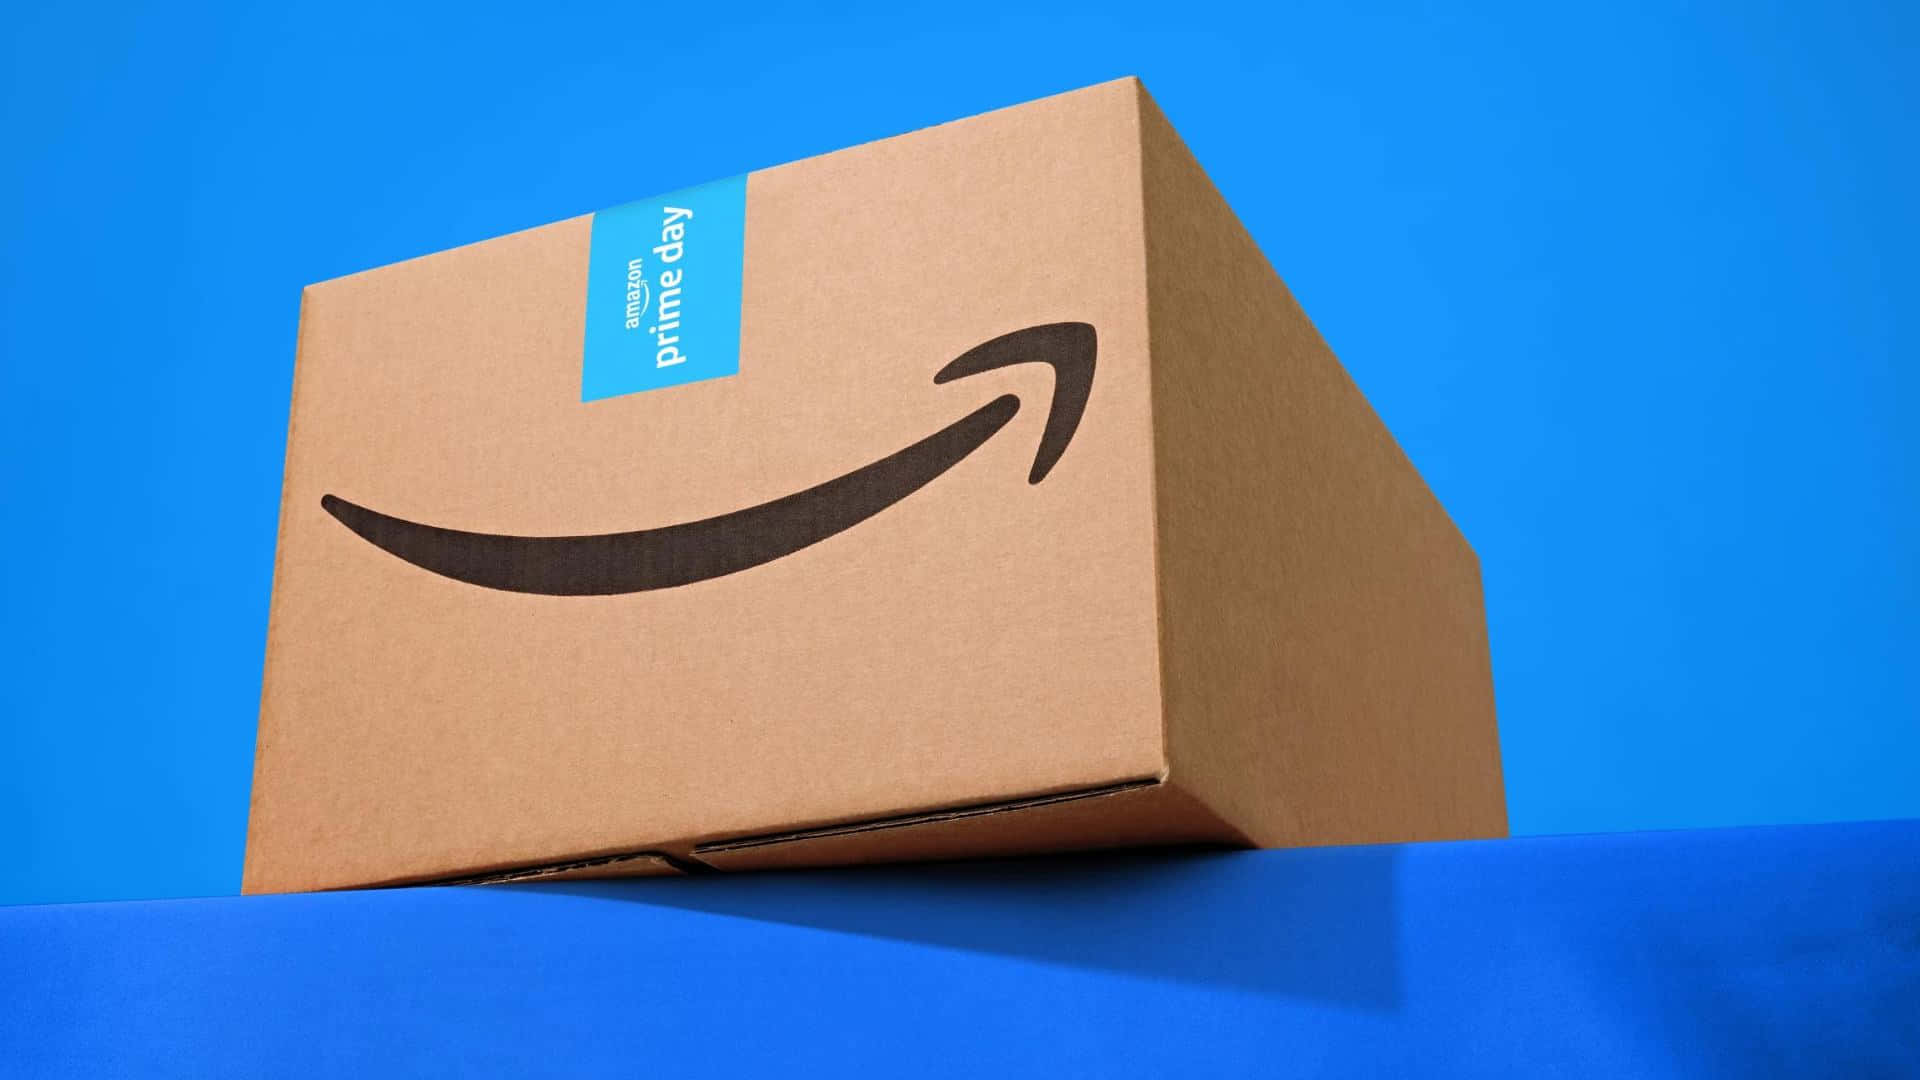 Prime Day Delivery Package Wallpaper